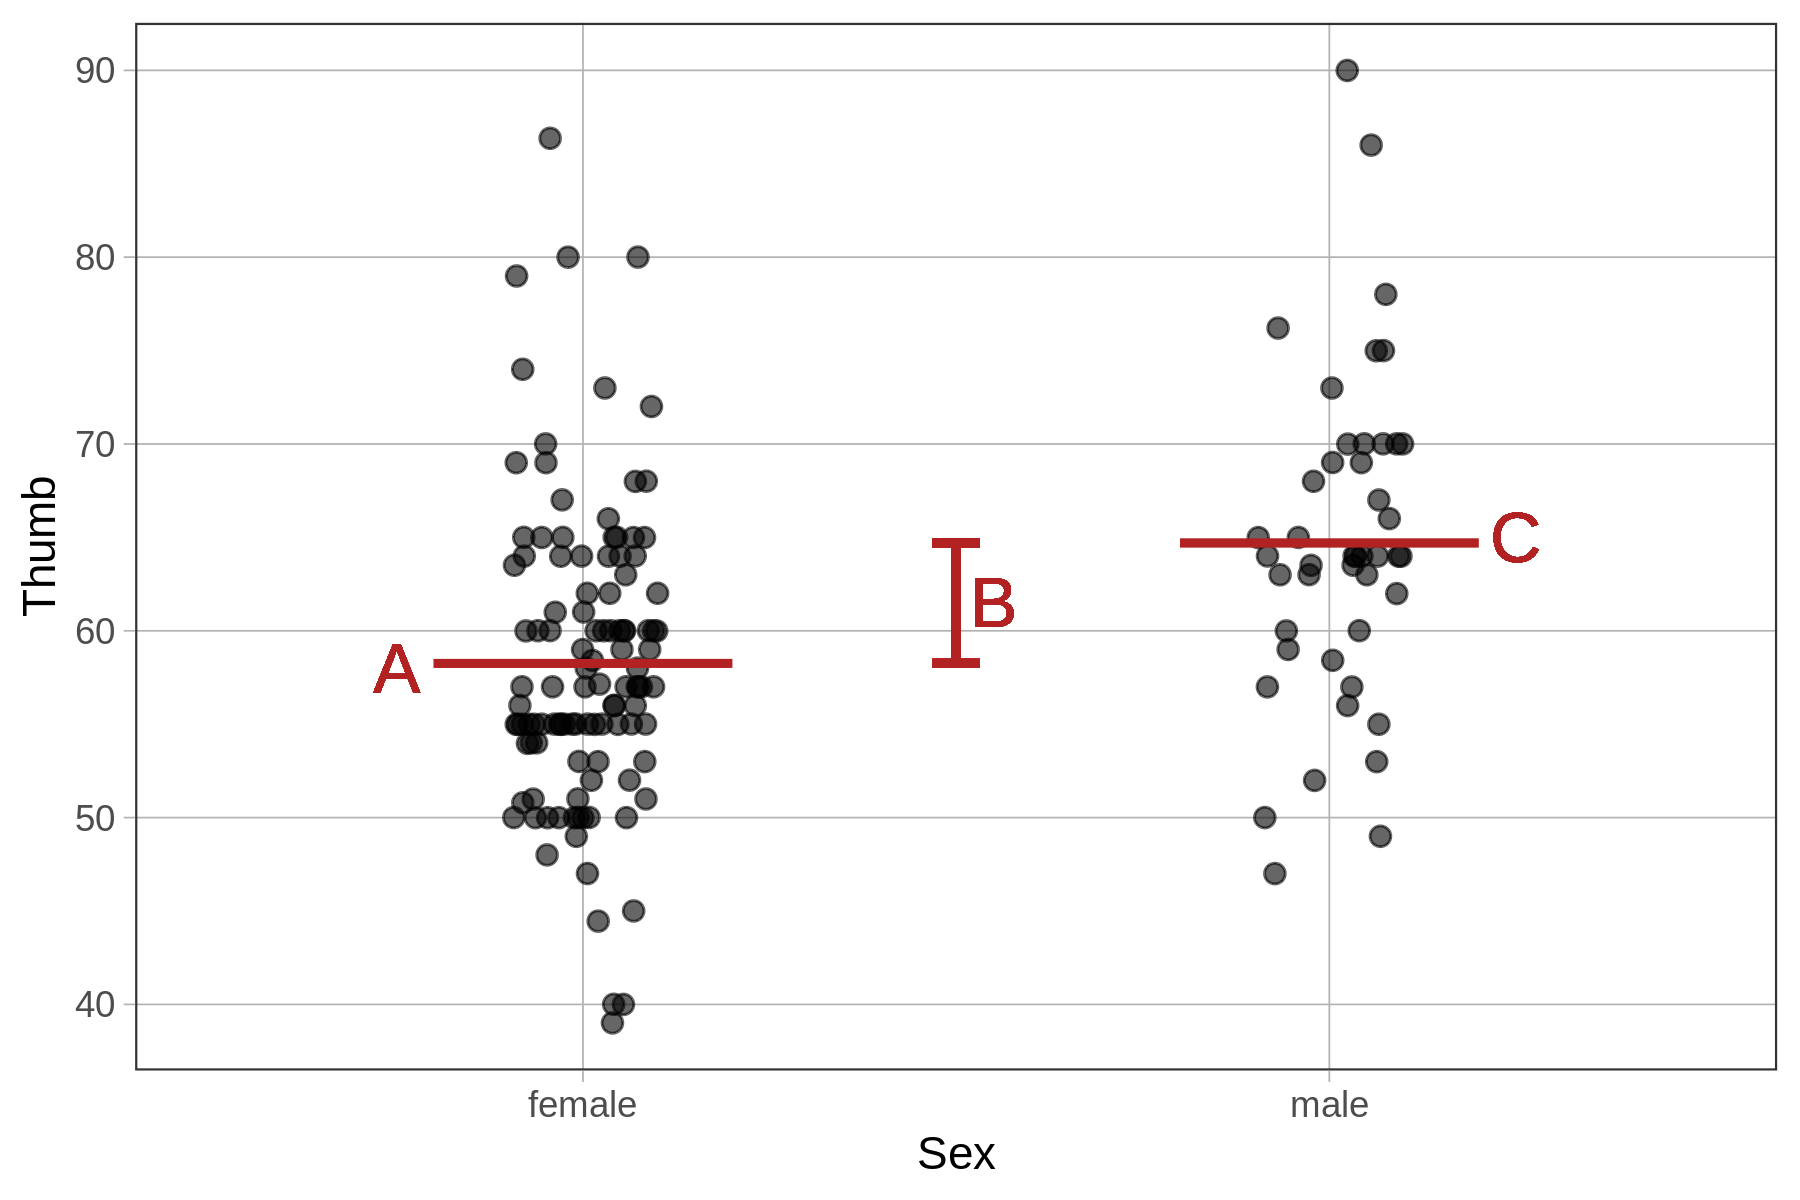 Jitter plot of Thumb predicted by Sex (female and male), with the mean of each group overlaid as a horizontal line. The line for the mean of female is labeled with the letter A, the line for the mean of male is labeled with the letter C, and the distance between the two group means is drawn with a vertical line and labeled with the letter B.